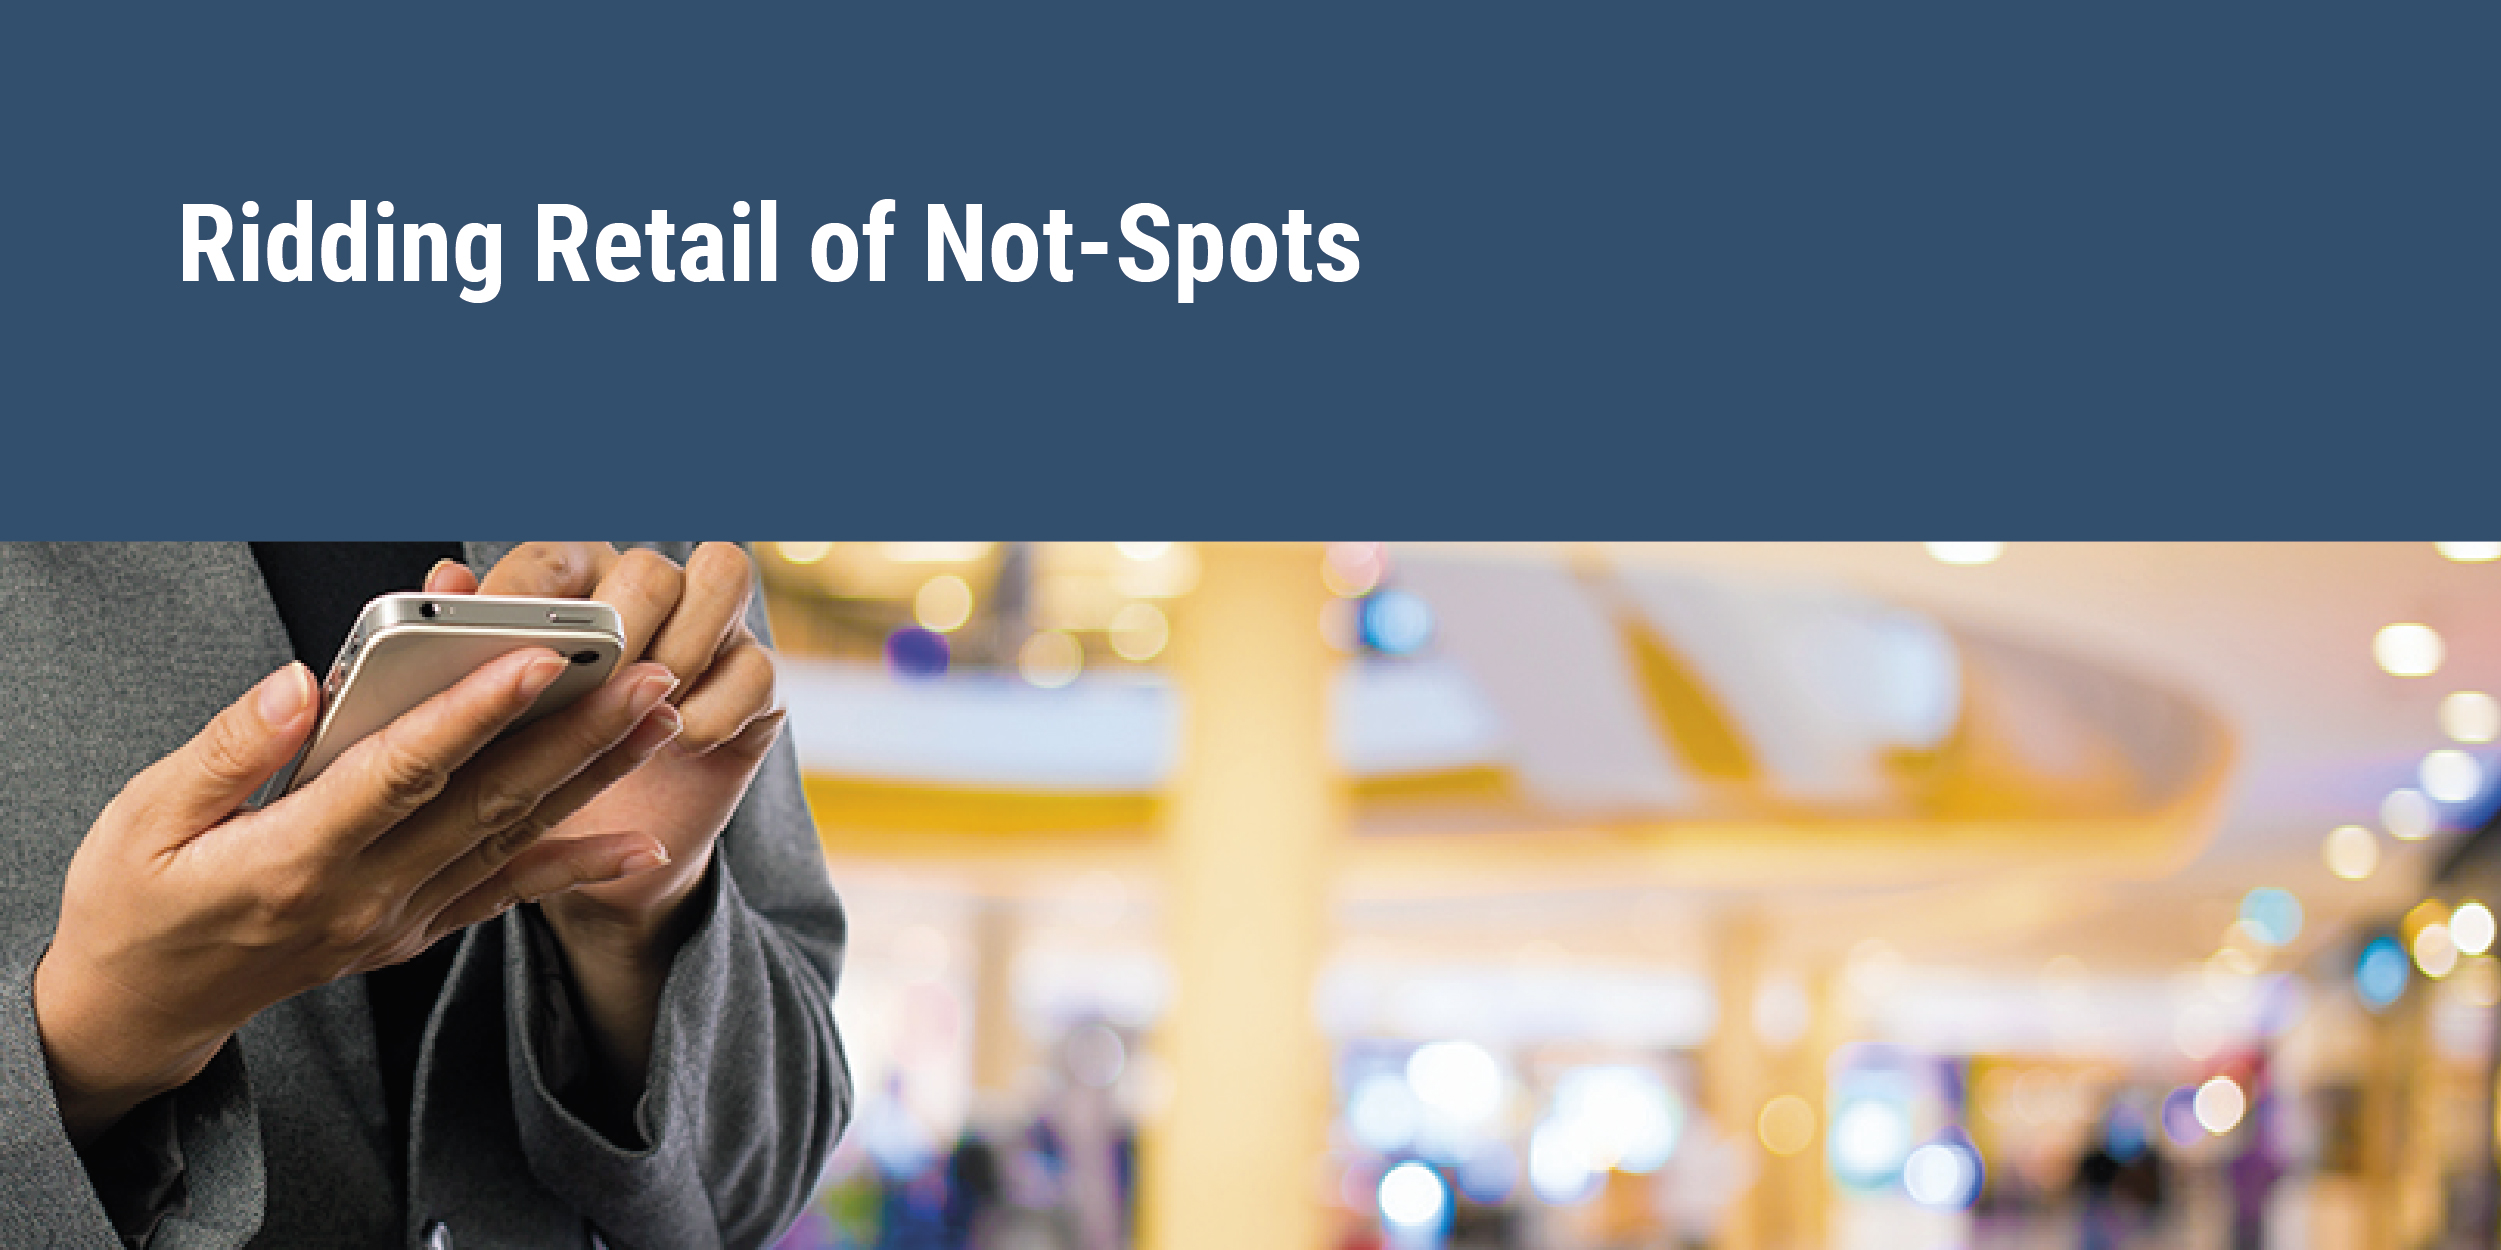 Ridding Retail of Not-Spots - cellular coverage in commercial buildings